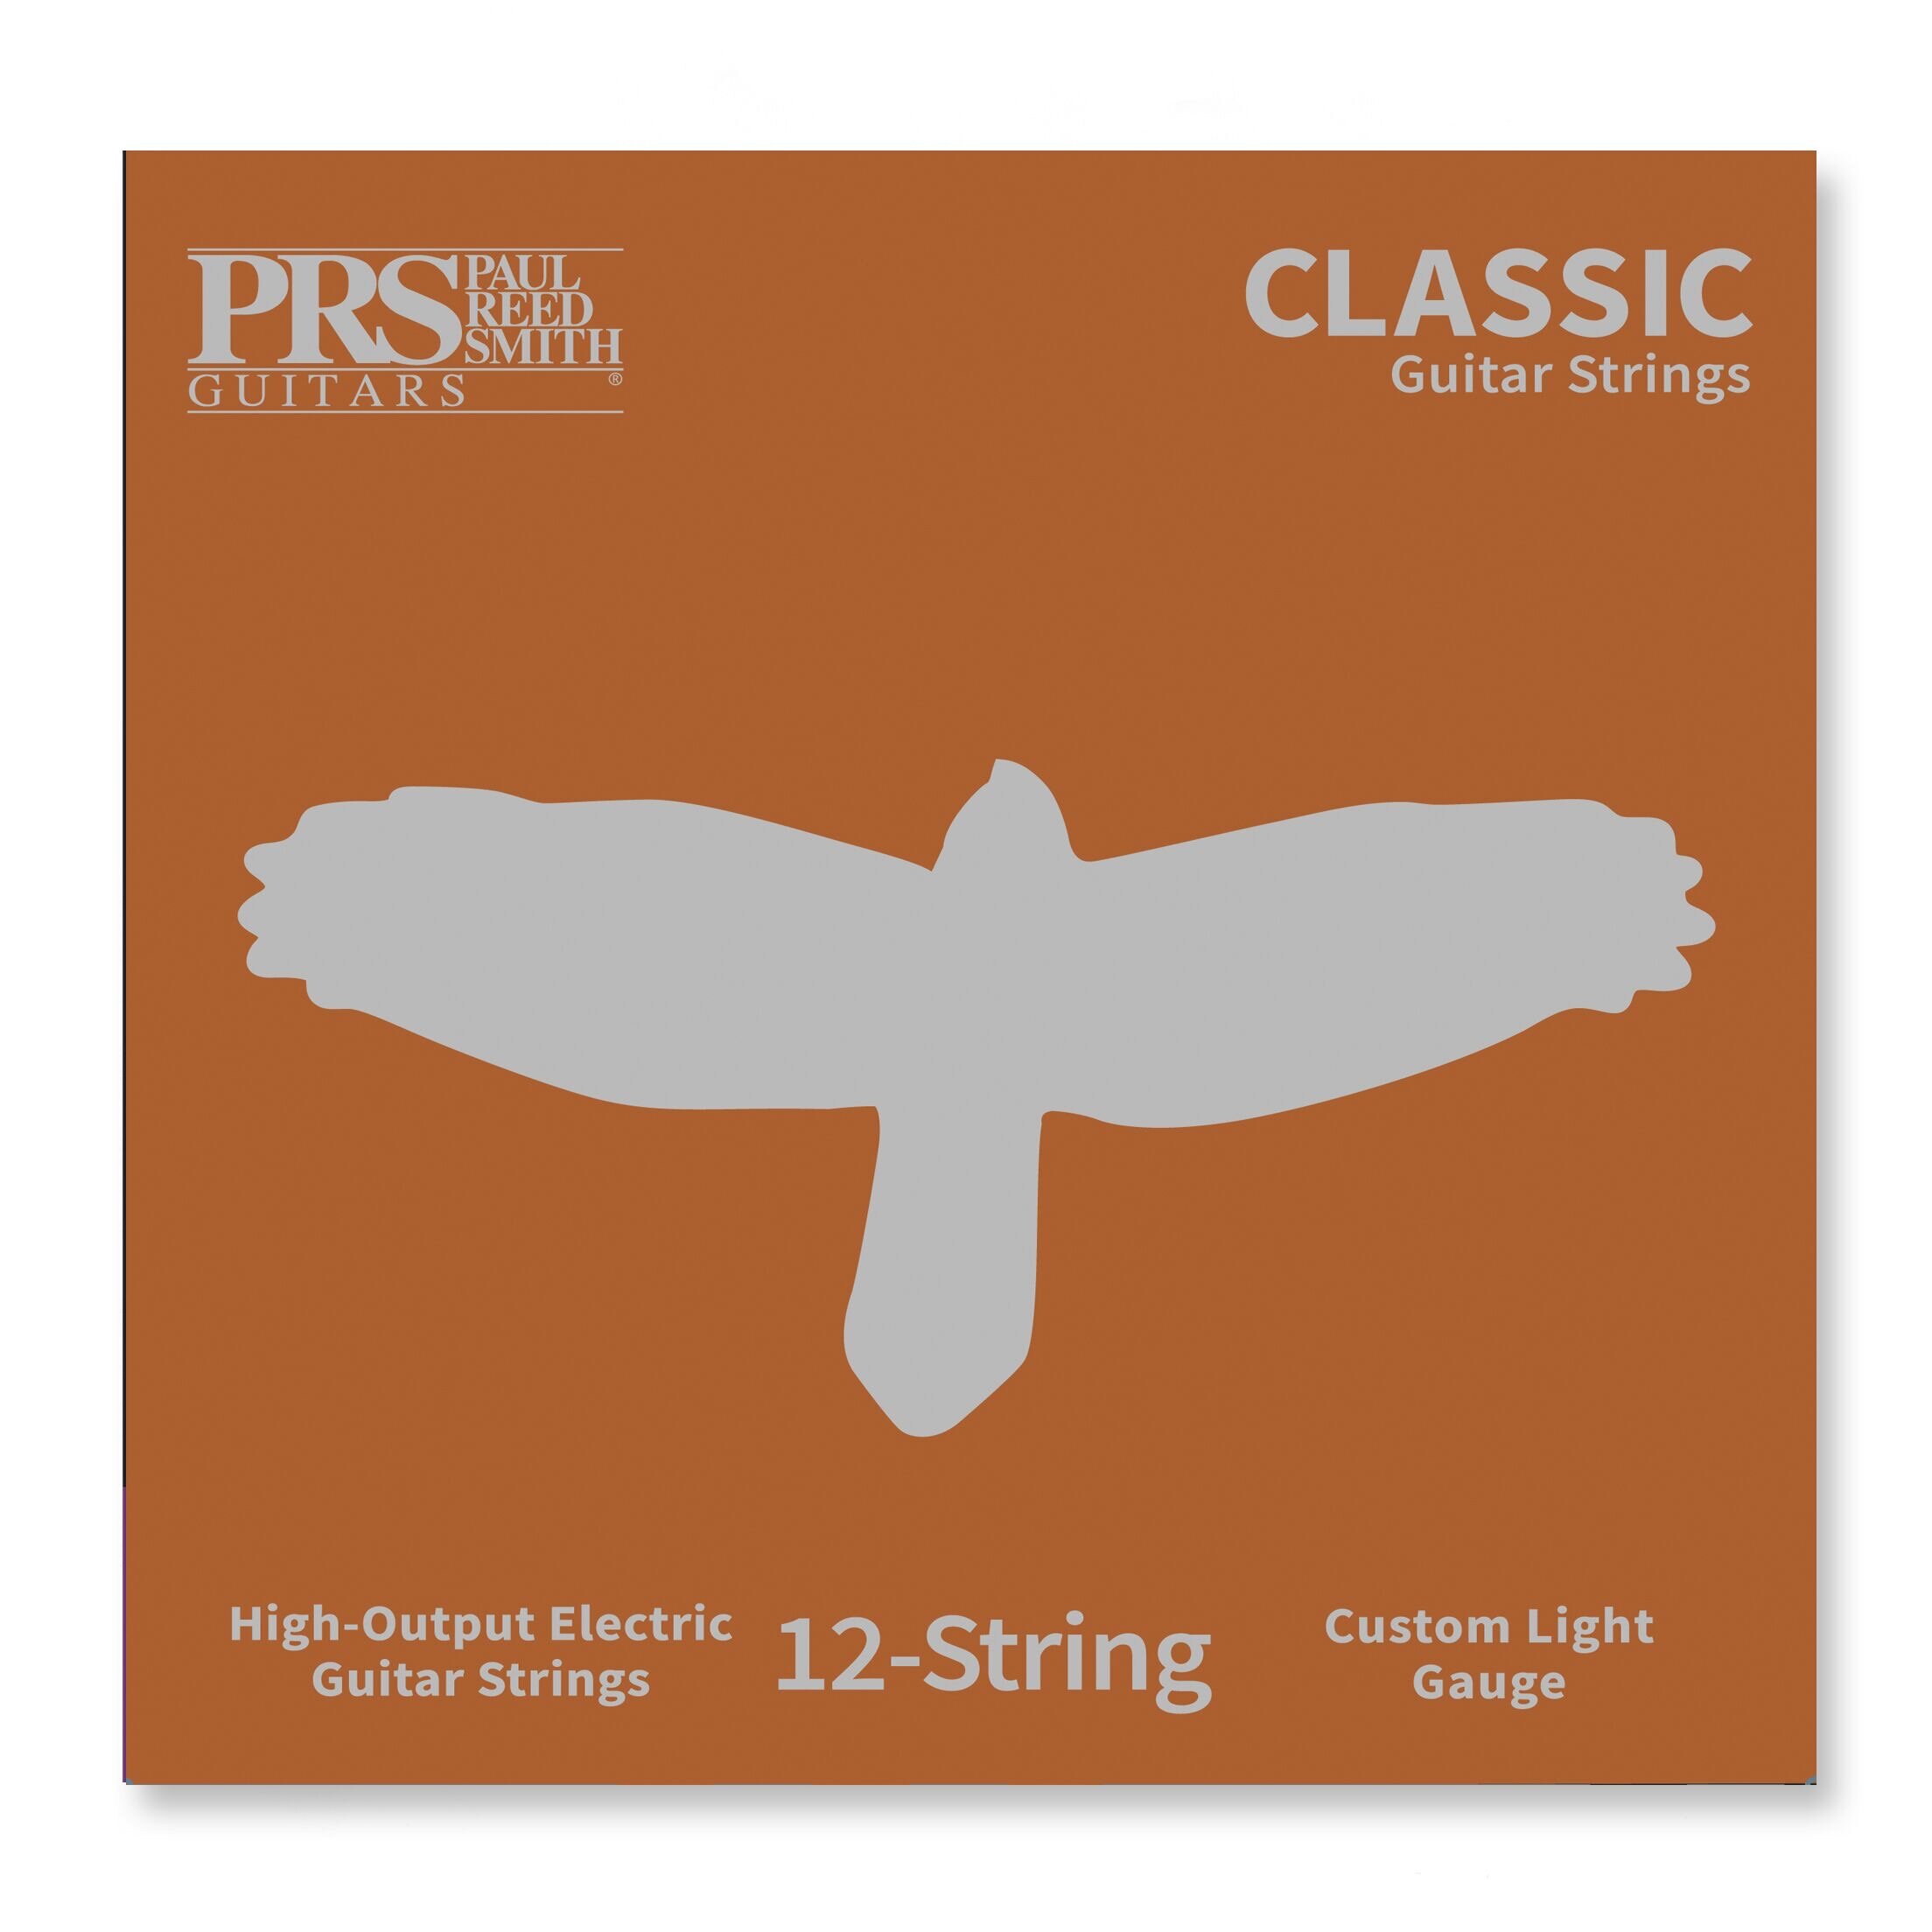  100148:008:001:001  Classic Strings 12-String 010-046 